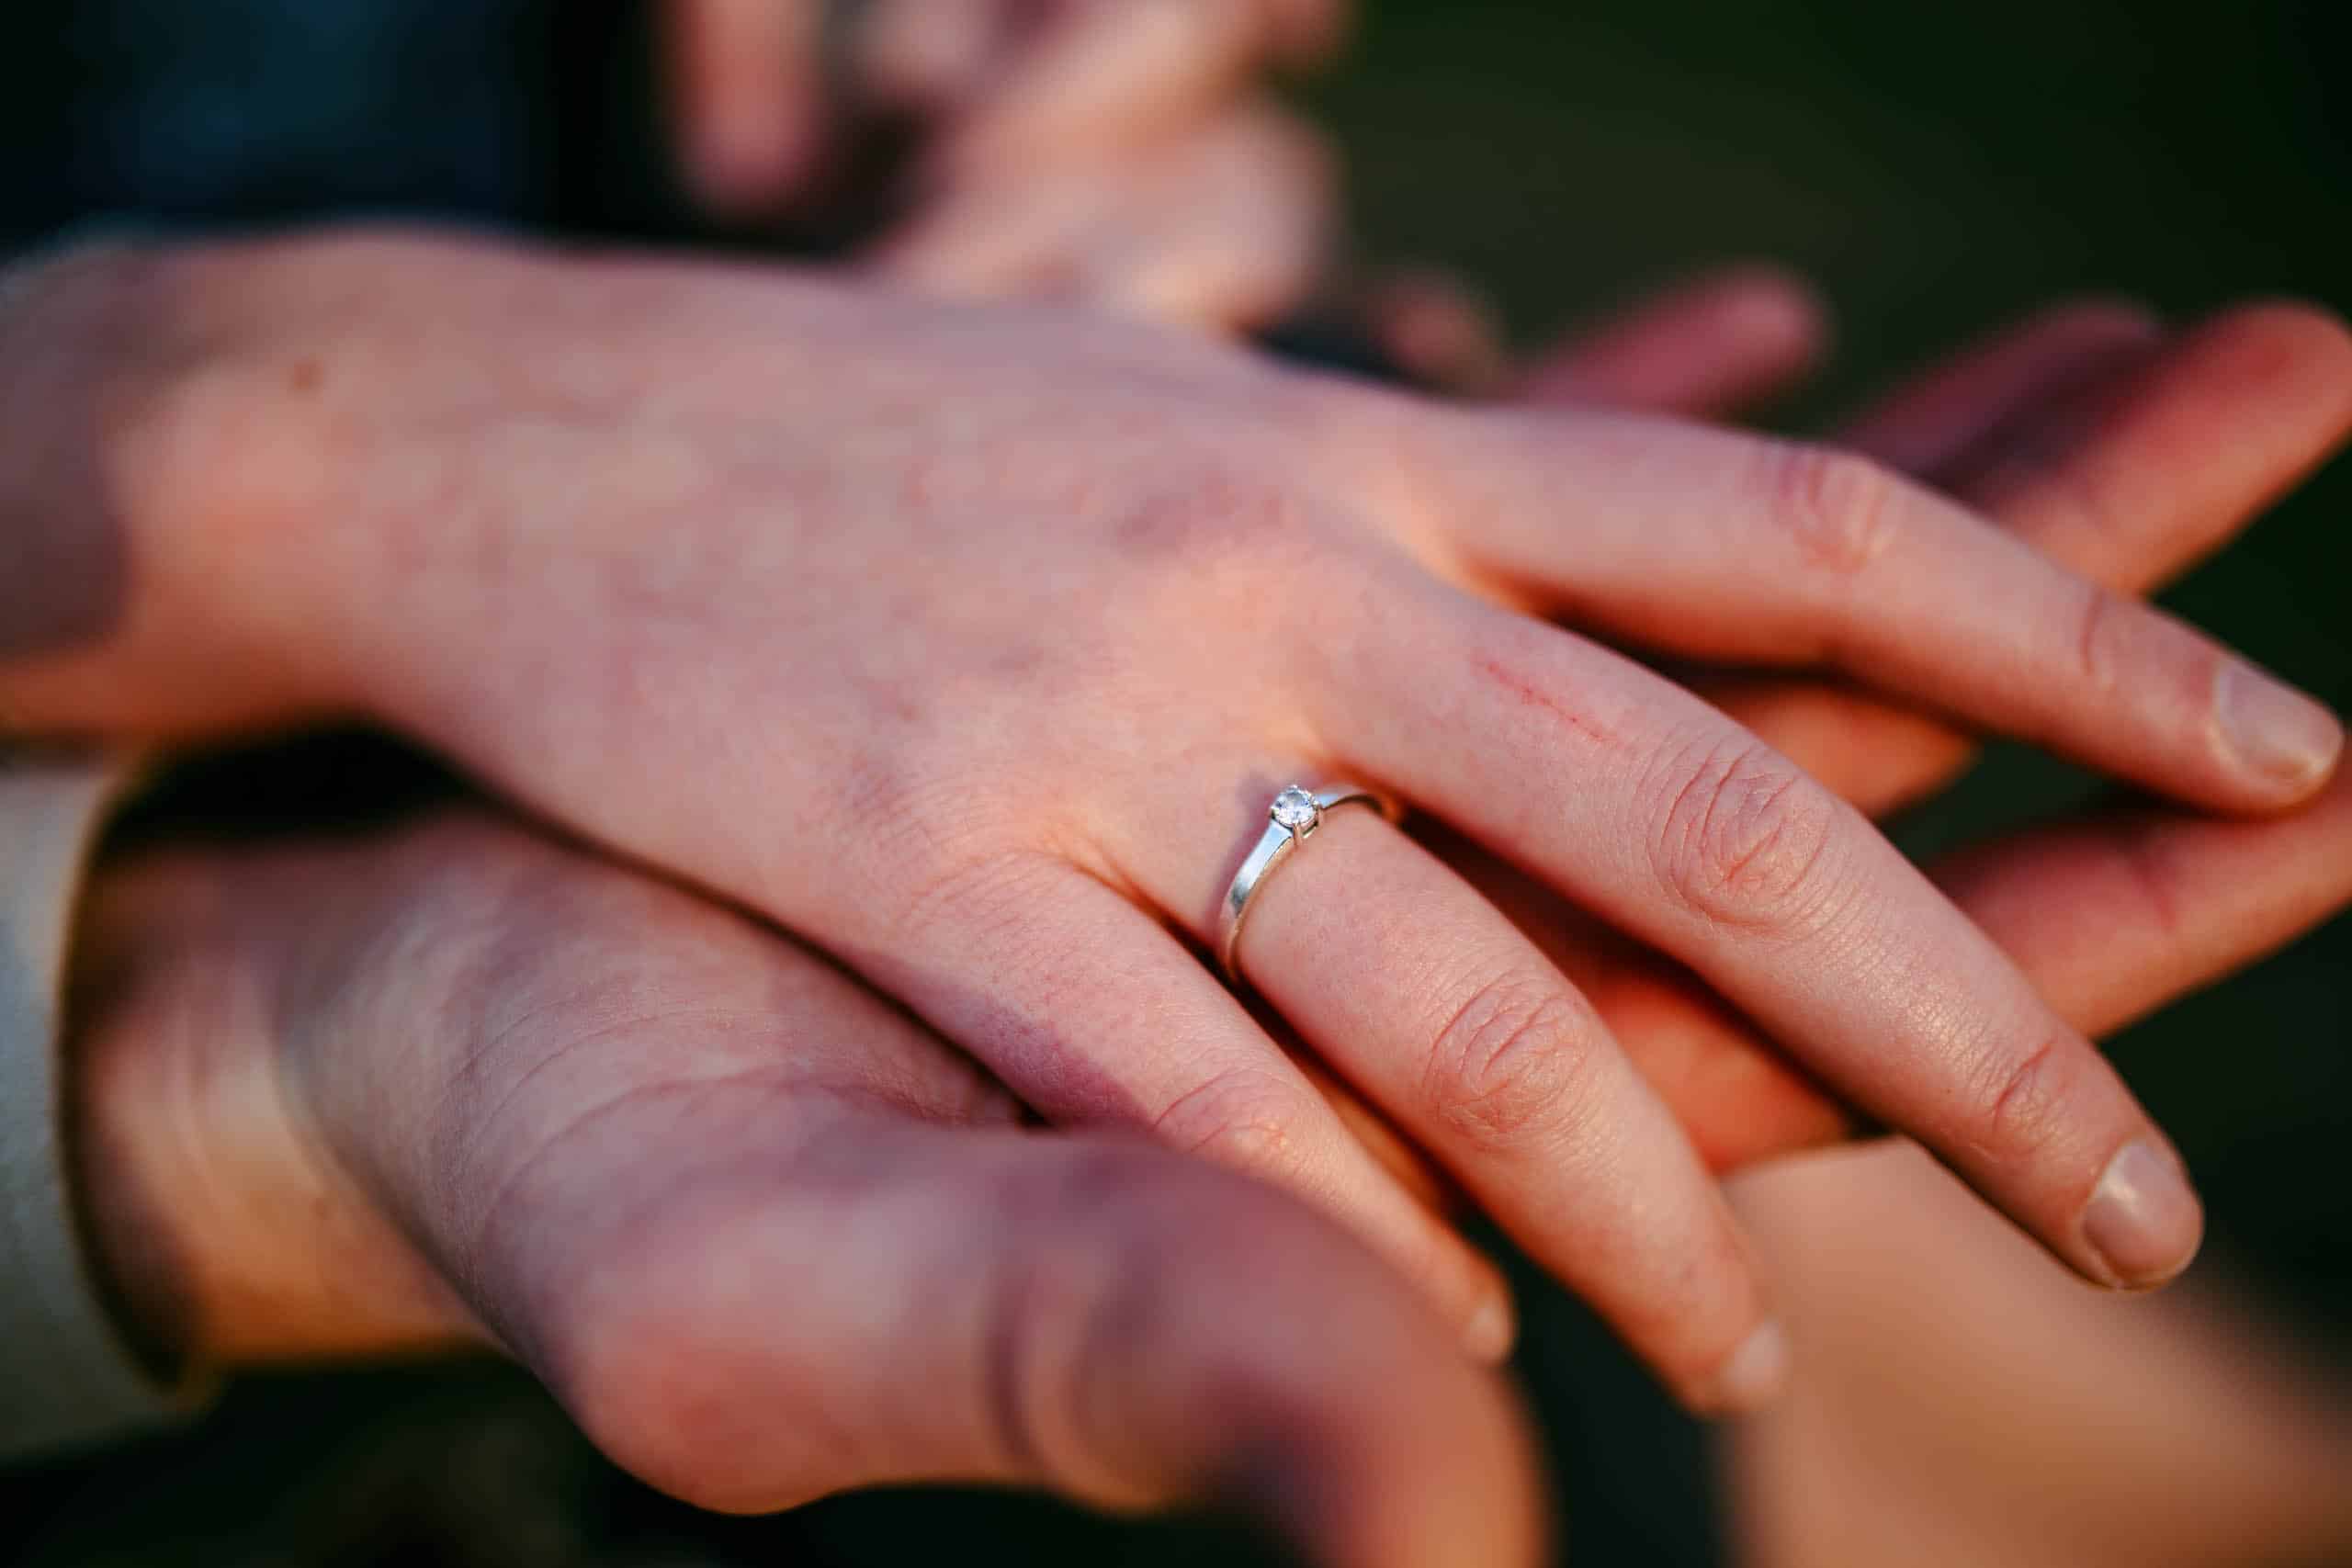 A couple's hands hold an engagement ring during a romantic proposal.